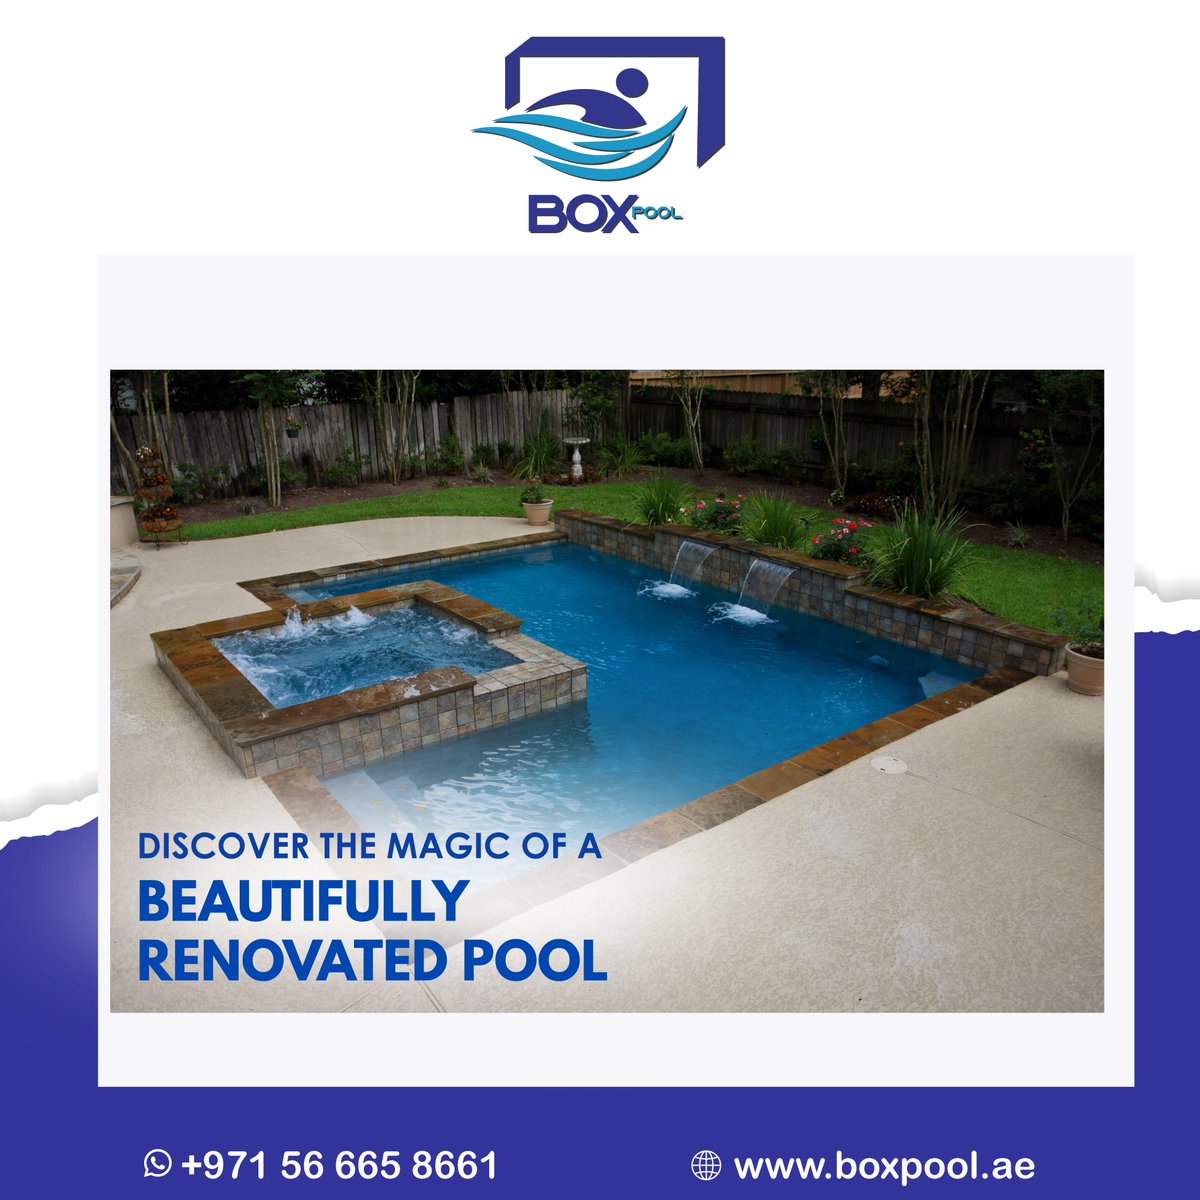 'Dive into luxury with our pool renovation service! 🏊✨ Experience the enchantment of a beautifully refurbished pool. Say goodbye to old and hello to extraordinary! 💦

Our team is here to help! 
Contact us at +971 56 665 8661 

#SwimmingPools #PoolRenovation #Dubai #LuxuryPools